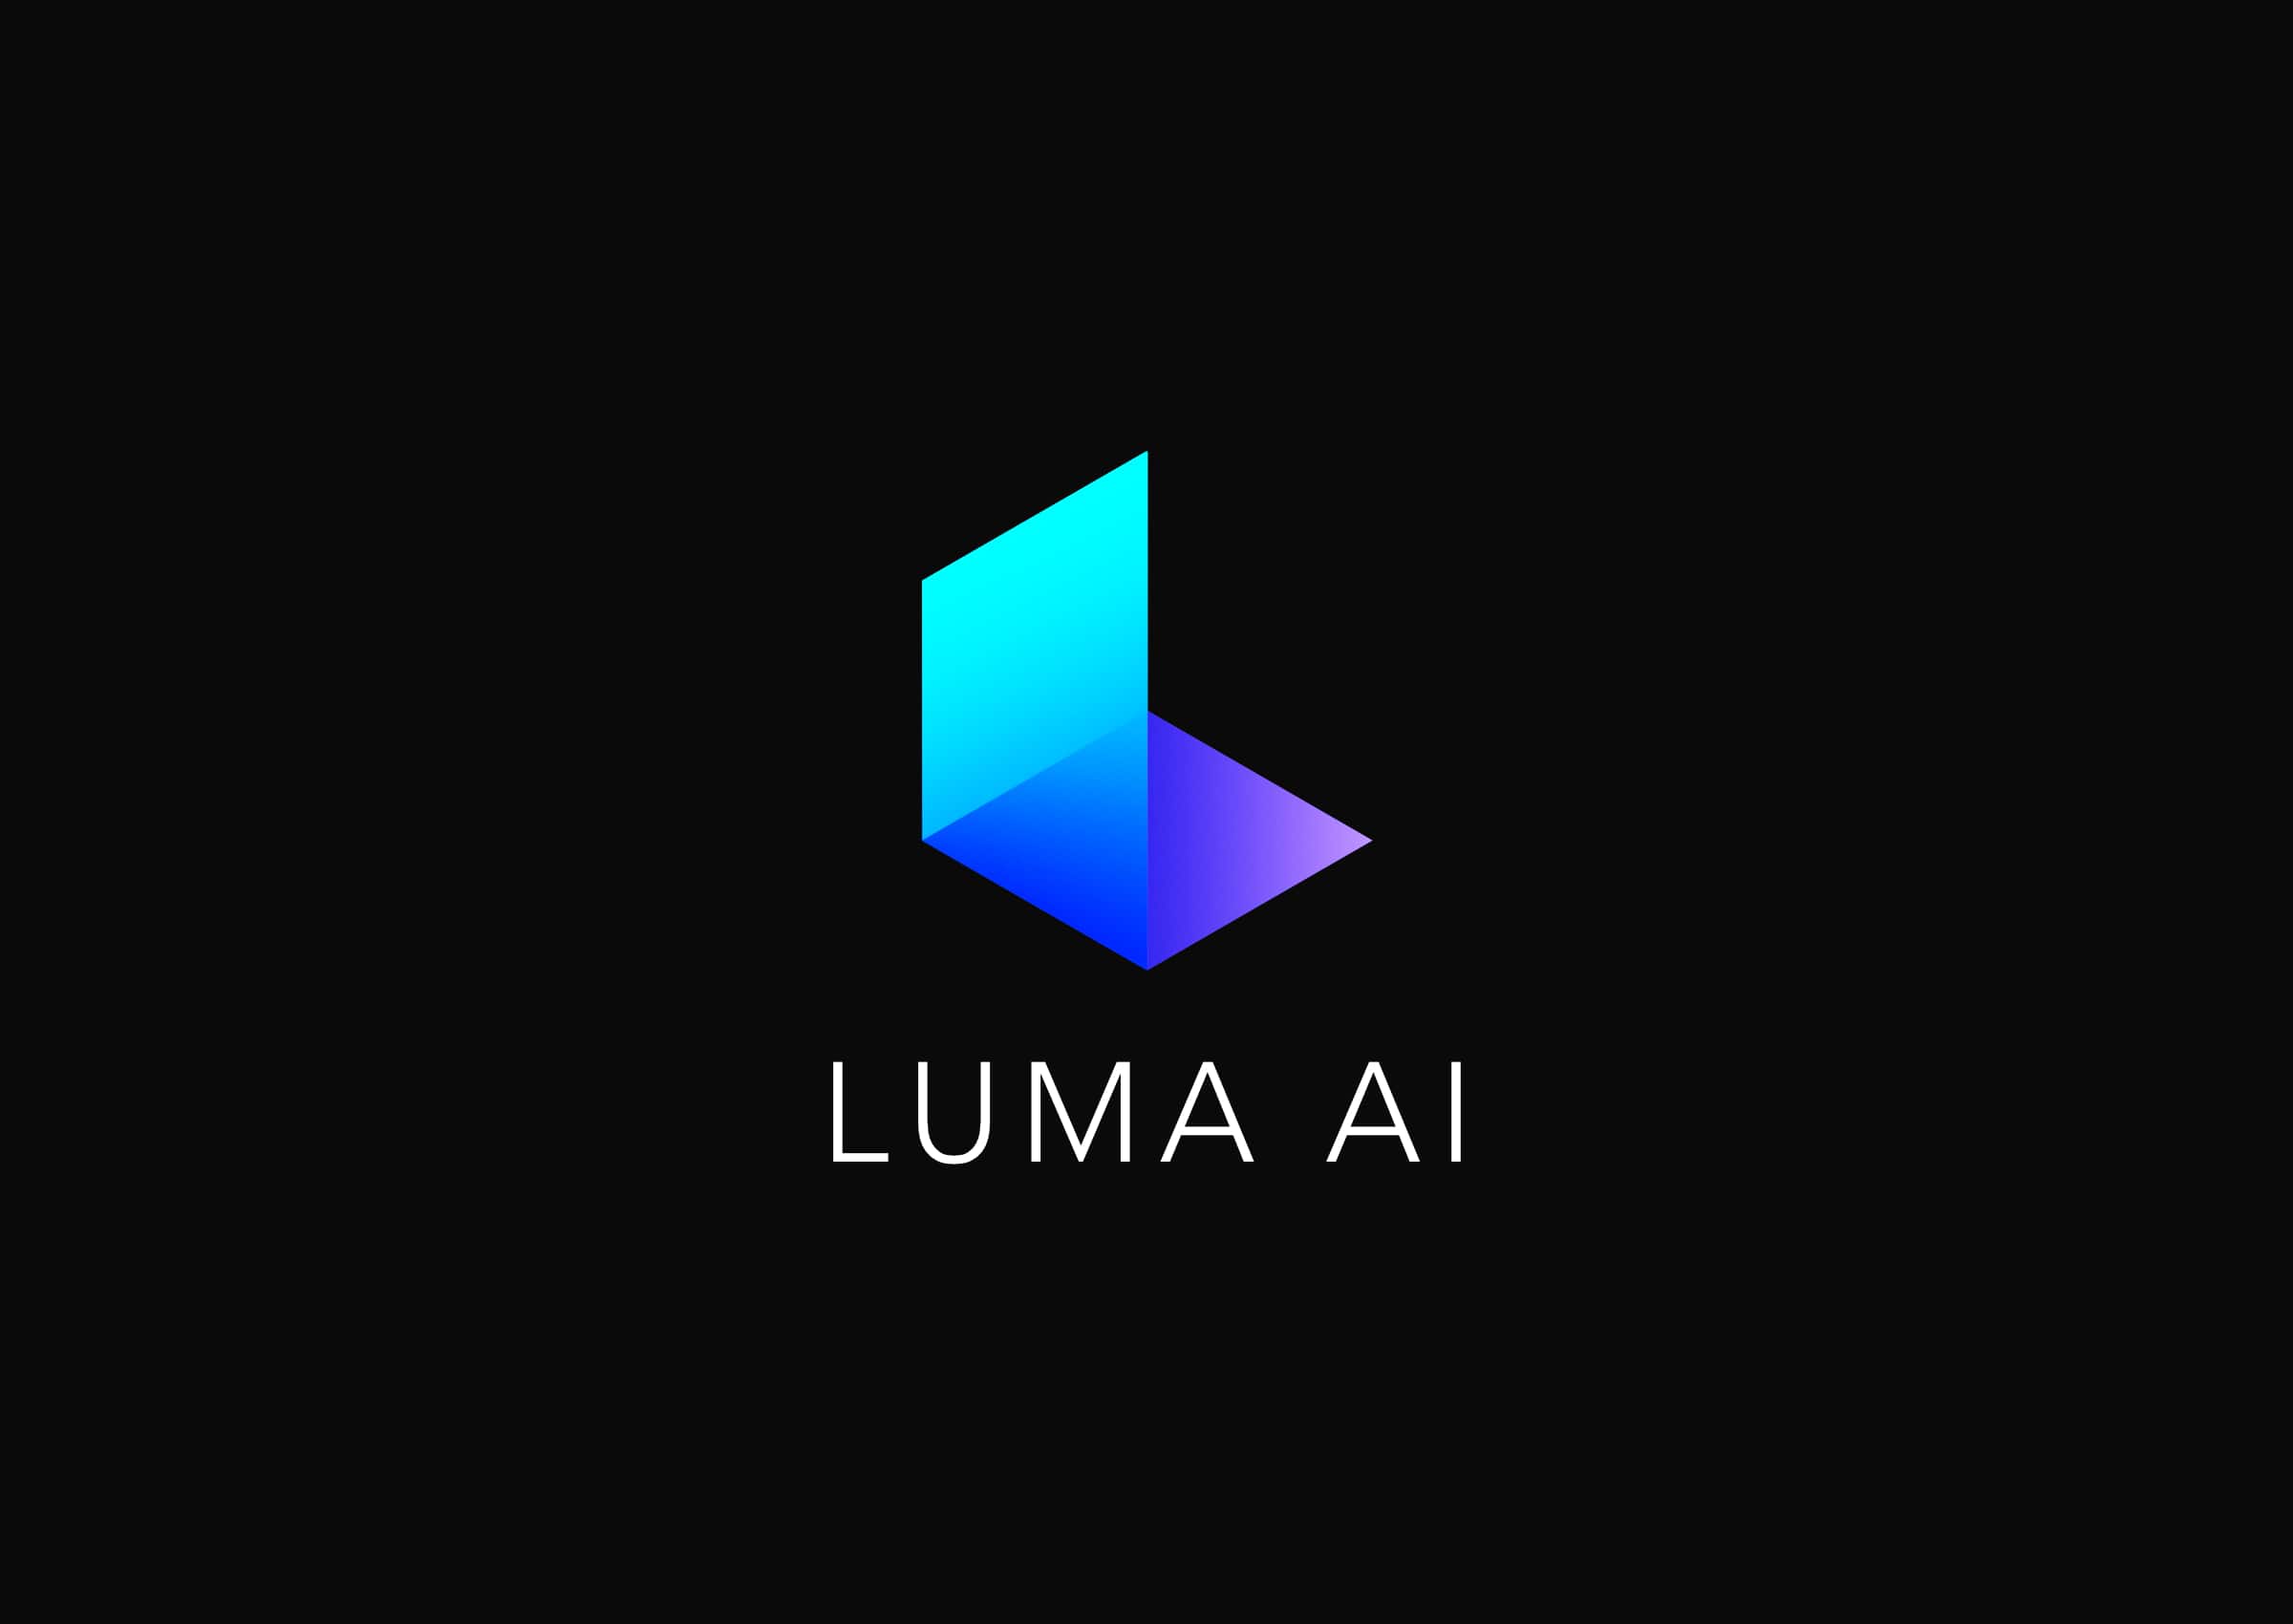 Luma AI’s Genie allows anybody to make 3D objects from text